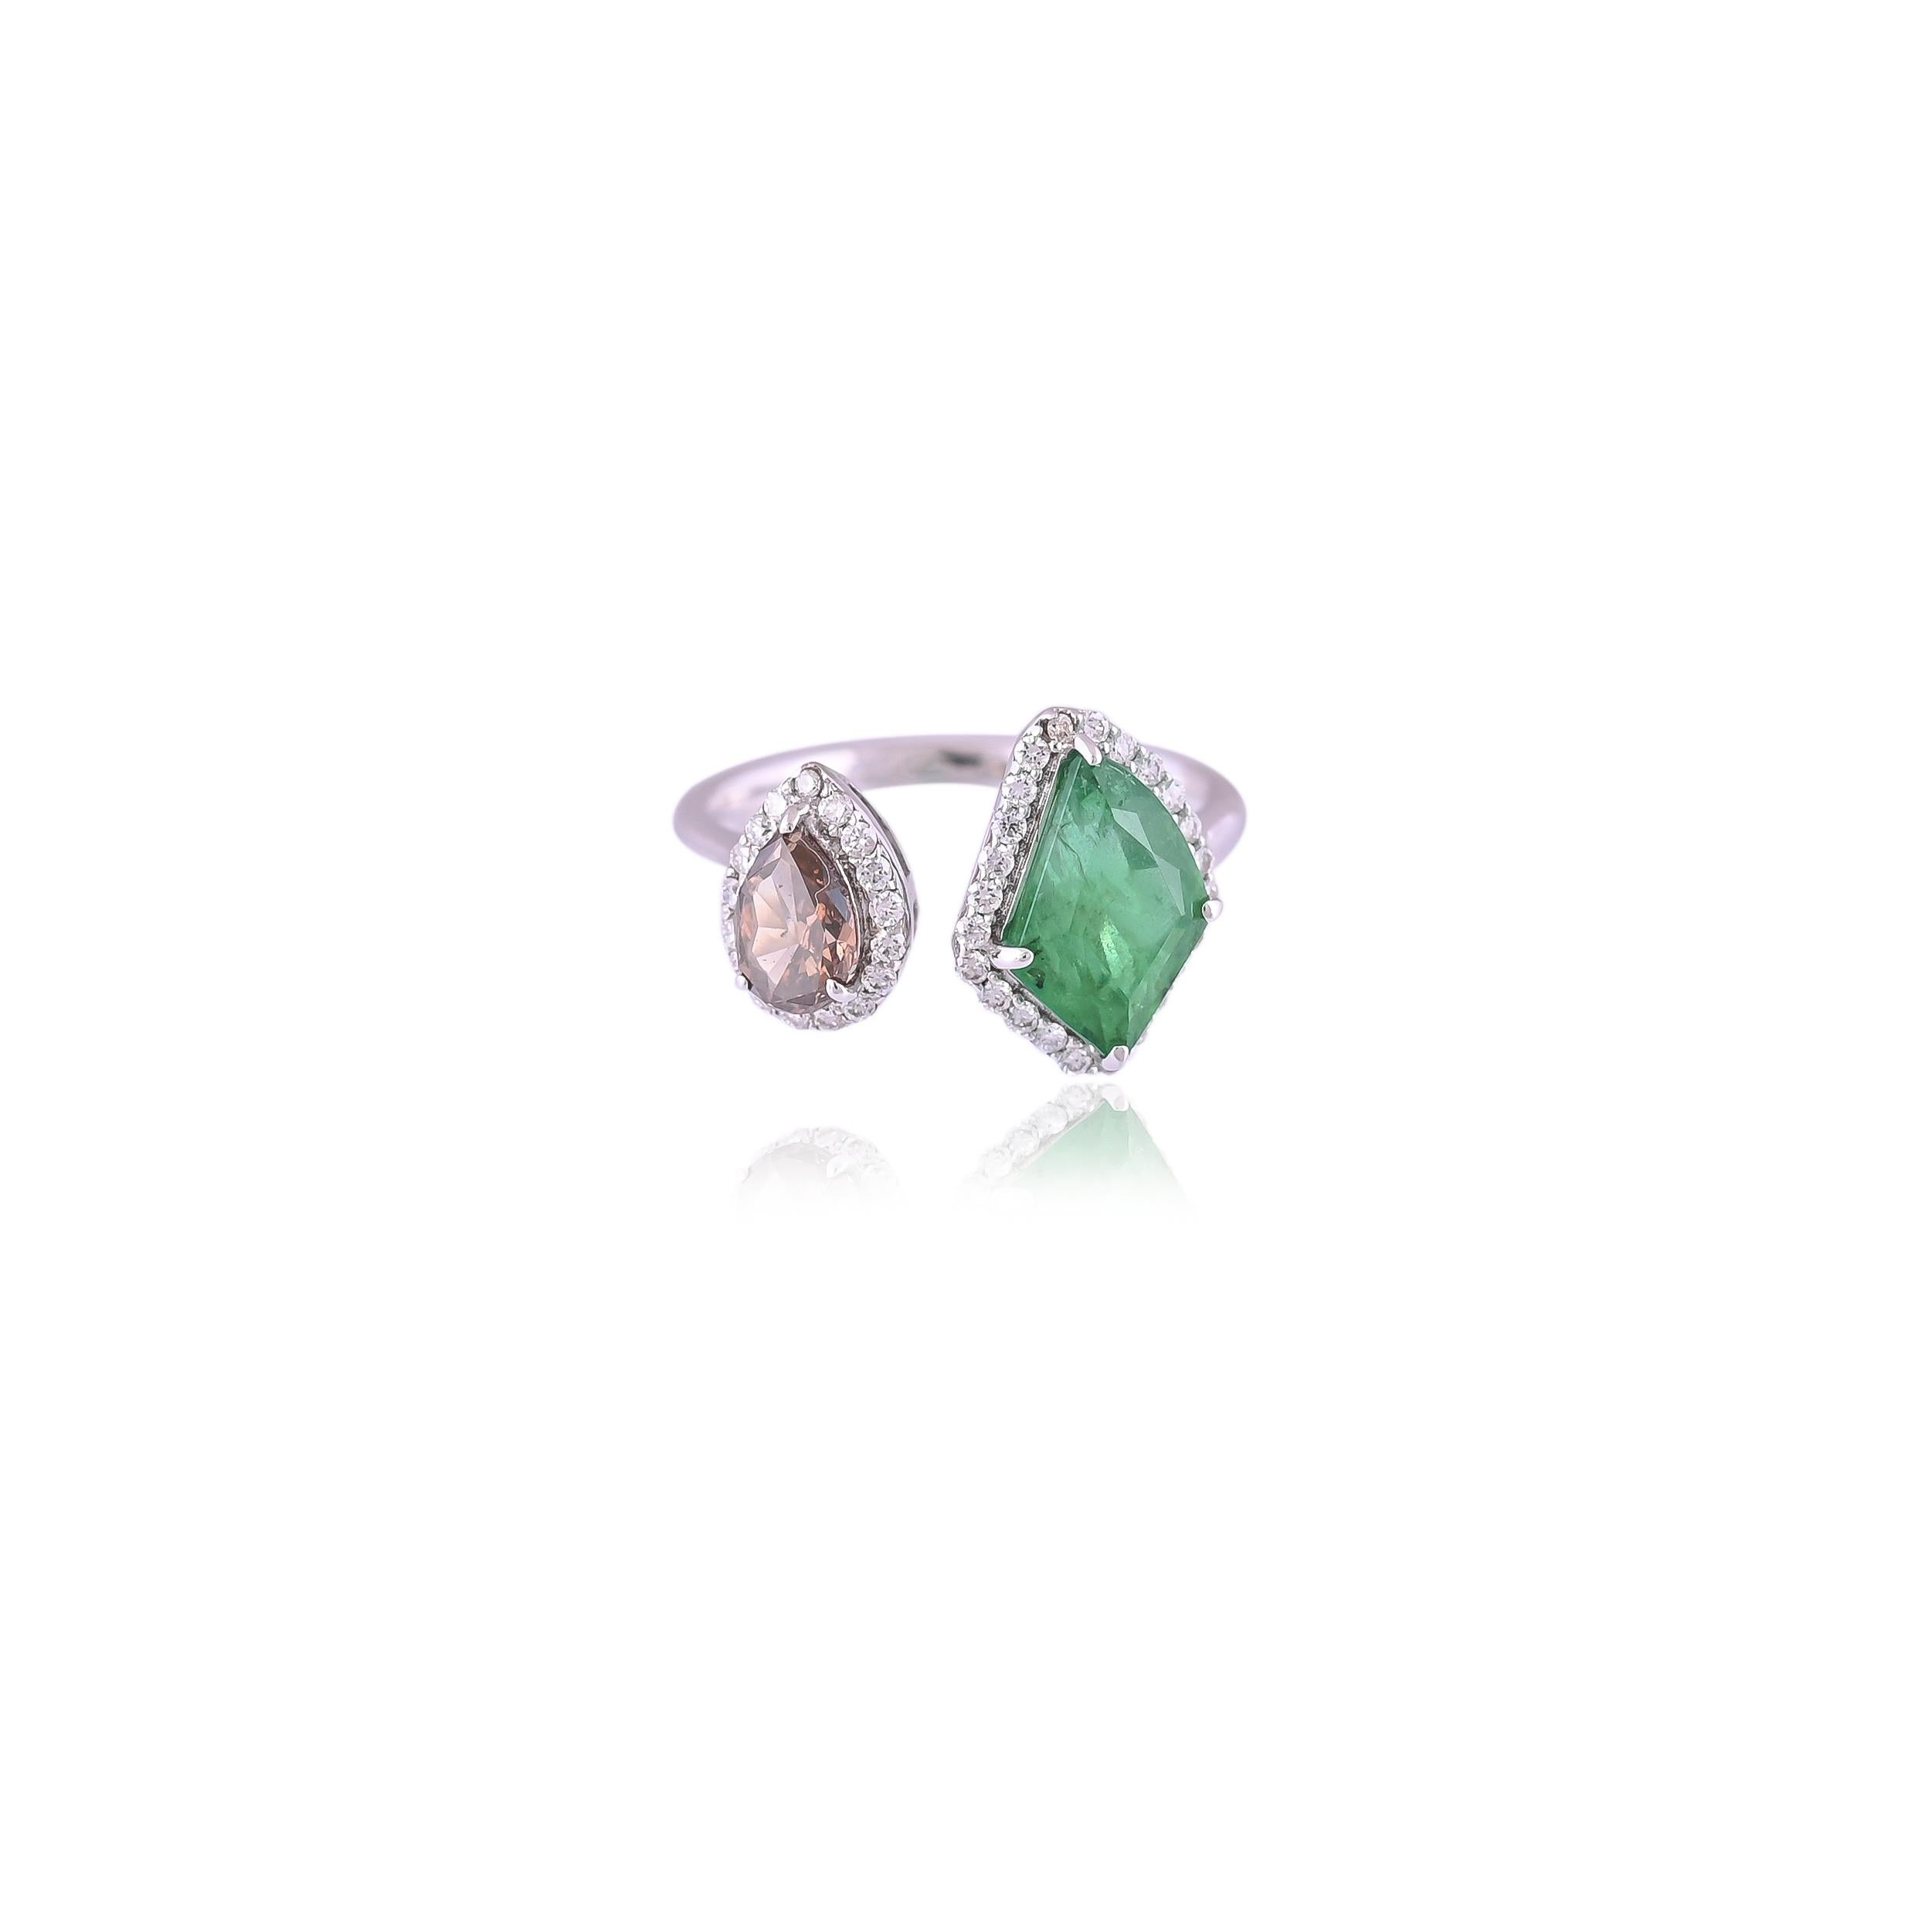 A very gorgeous and dainty, Emerald & Diamond Cocktail Ring set in 18K Gold. The weight of the Emerald is 1.77 carats. The Emerald is completely natural, without any treatment and is of Zambian origin. The combined weight of the Diamonds is 0.58